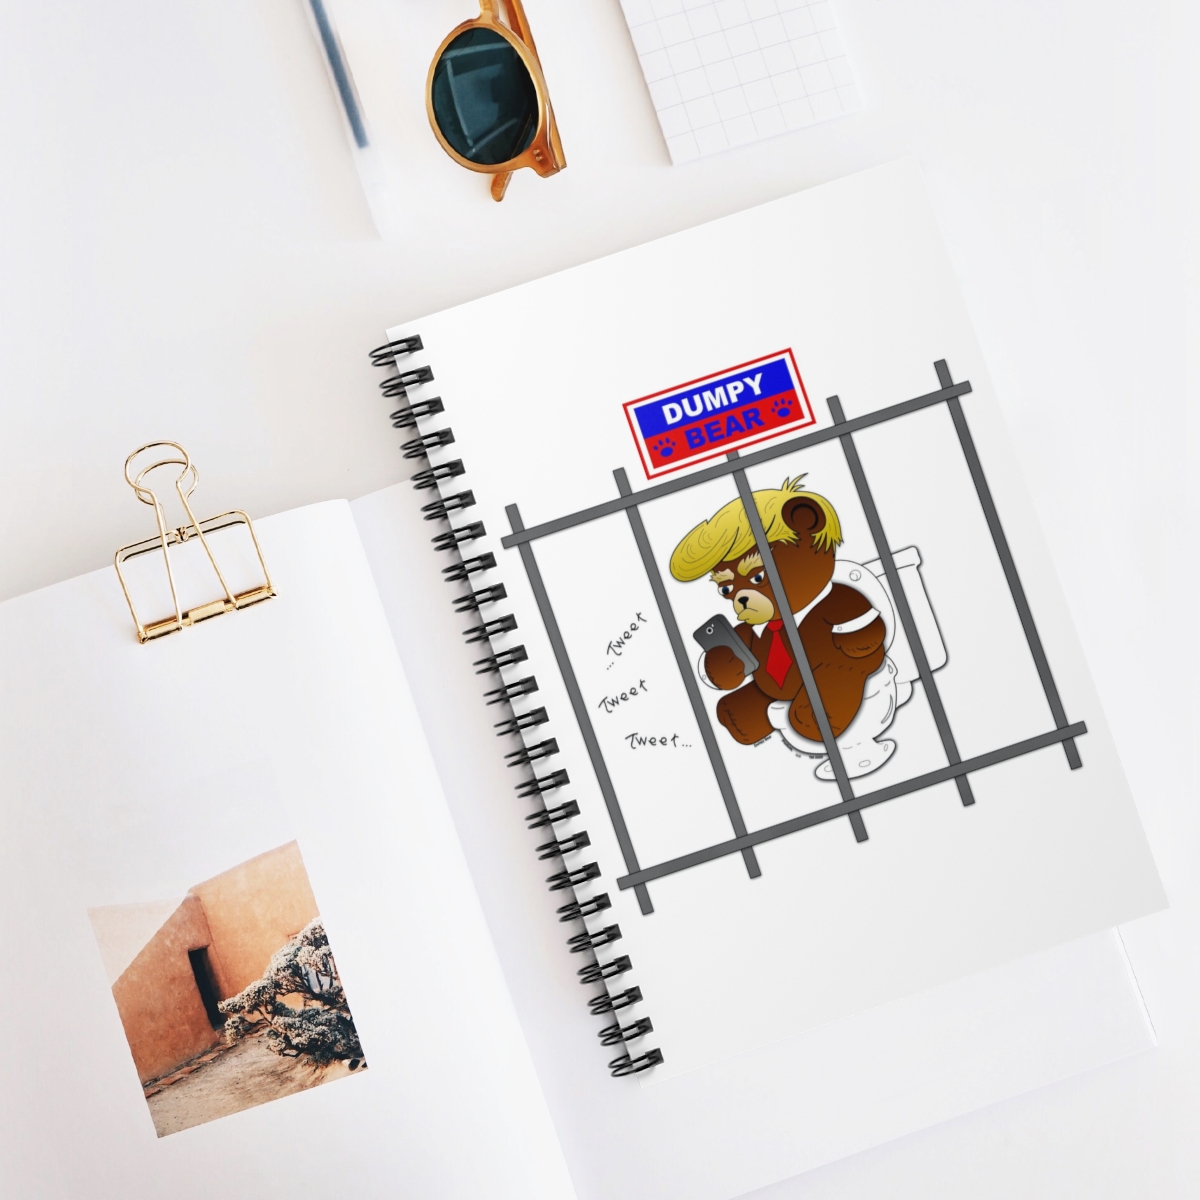 Dumpy Bear Tweeting on Toilet Behind Bars -Spiral Notebook - Ruled Line product thumbnail image